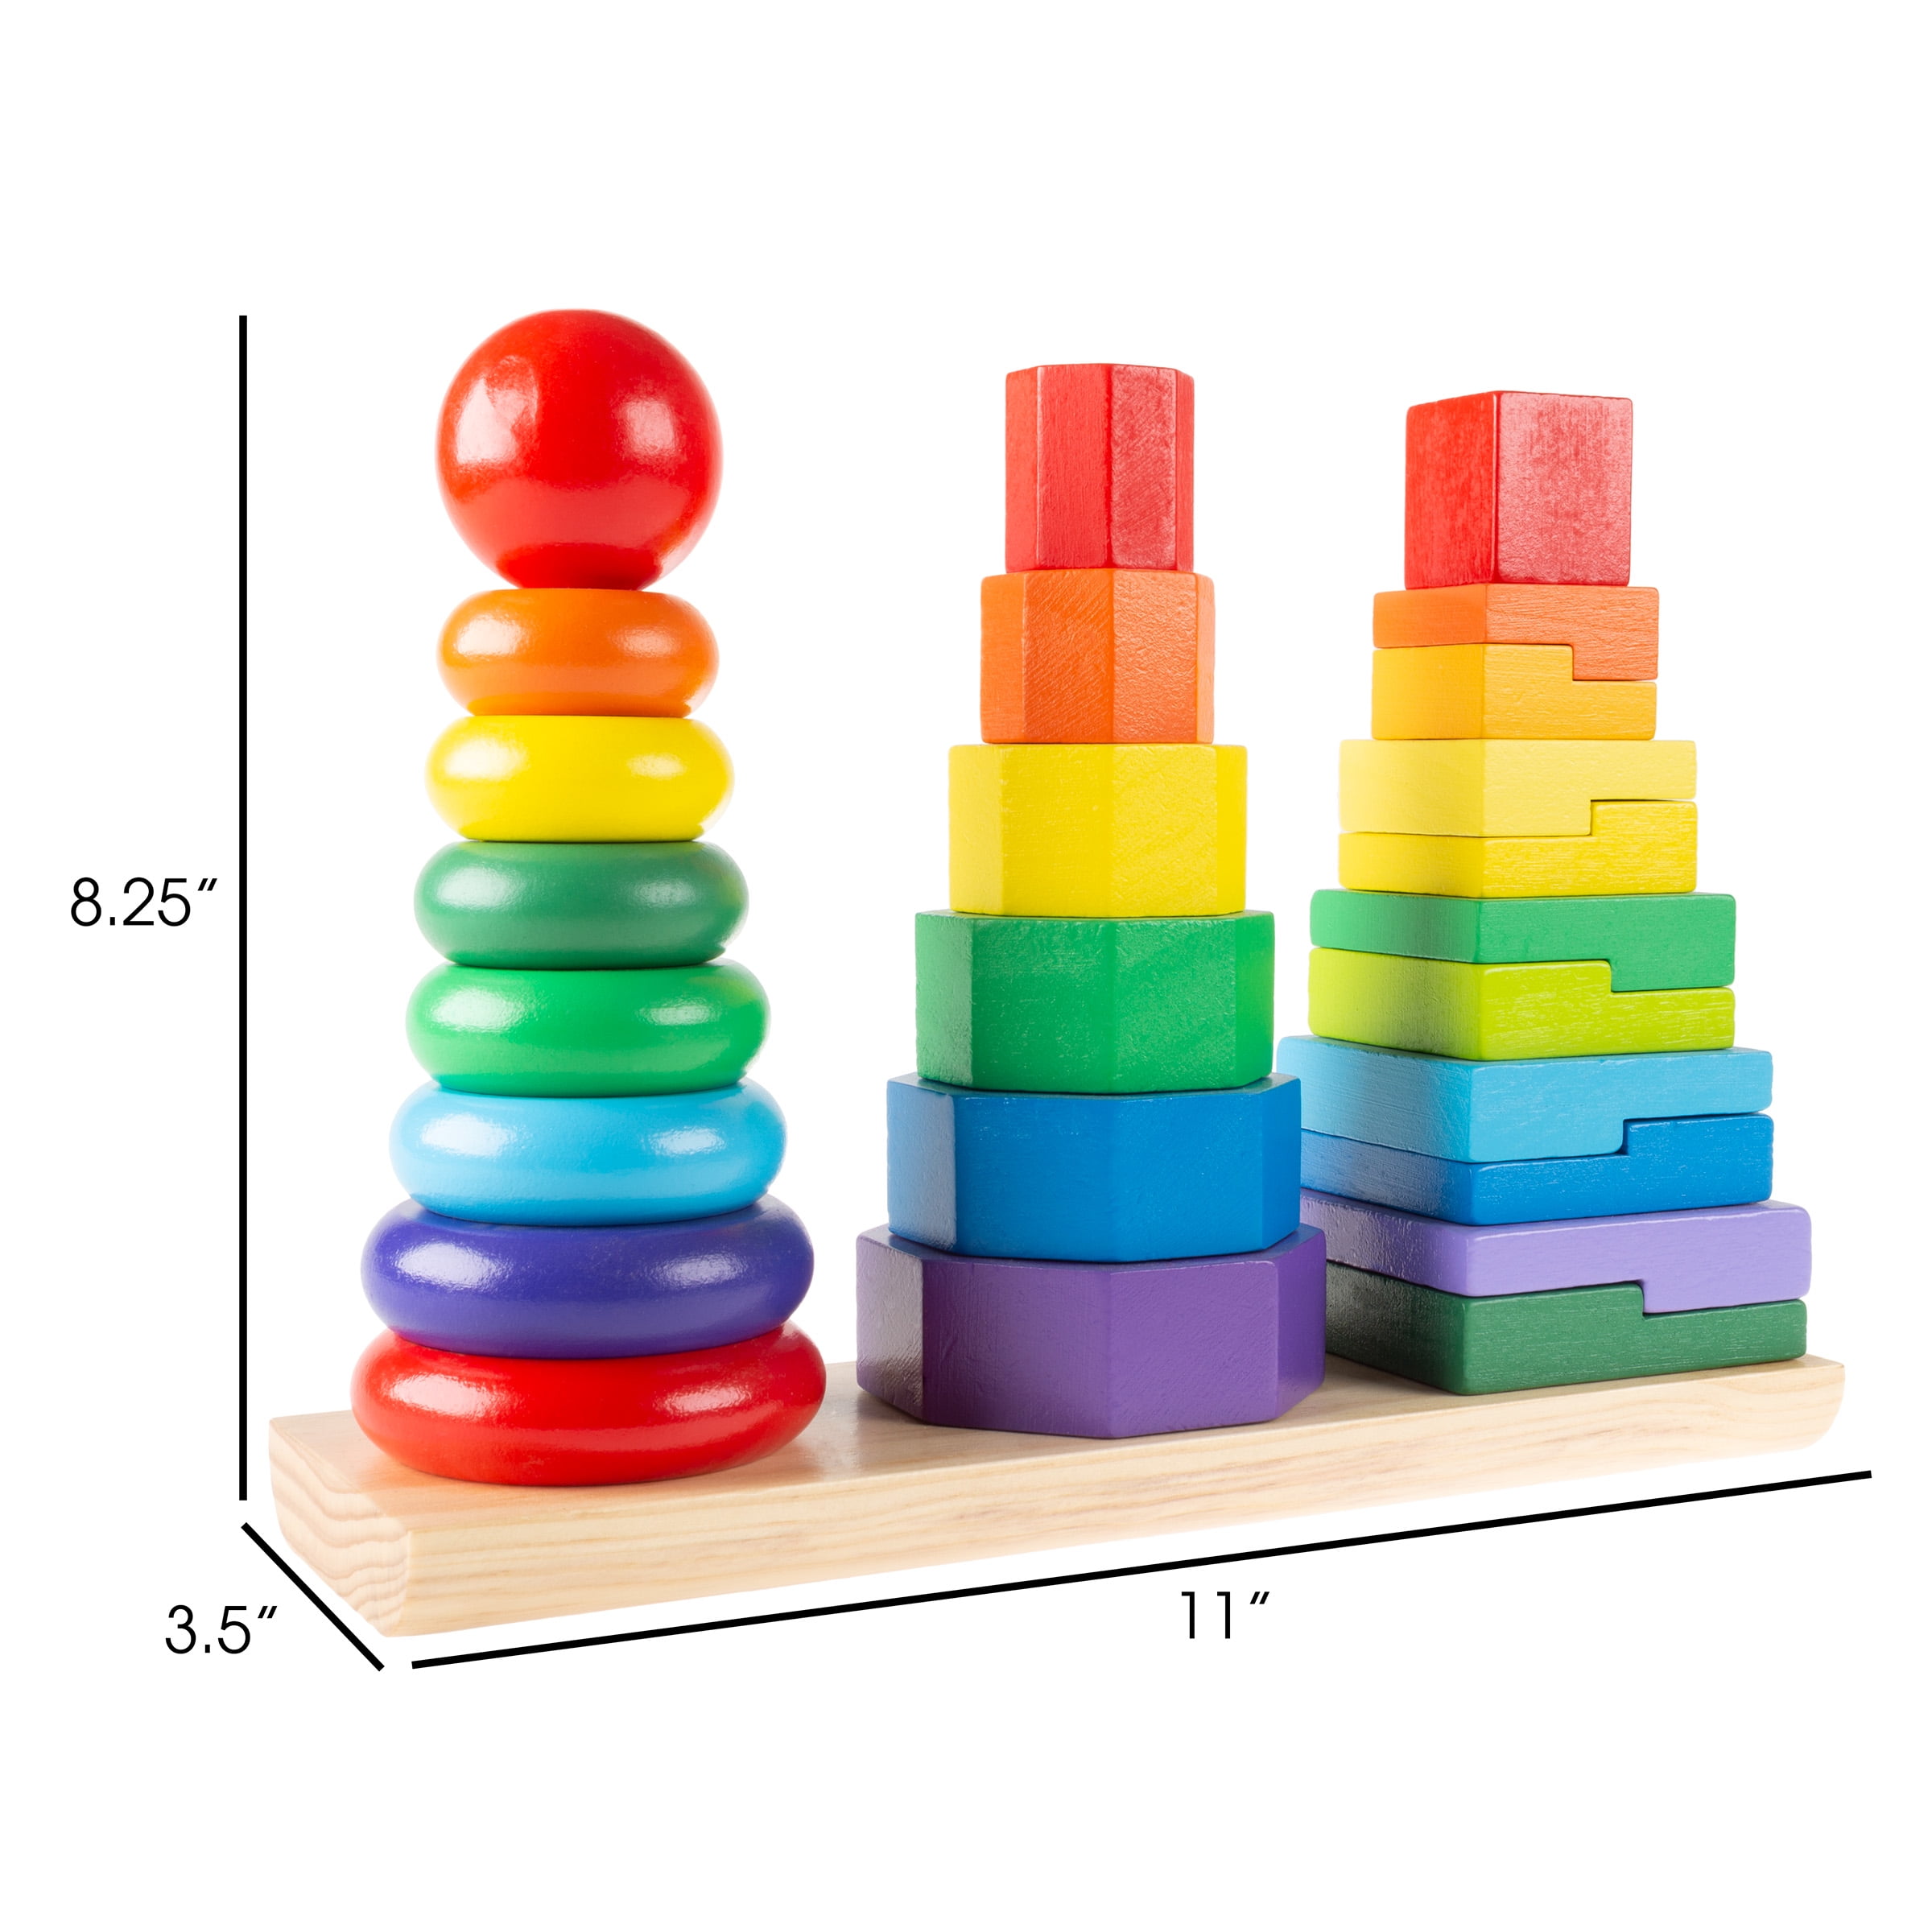 WOODEN TOYS RAINBOW STACKER Montessori Waldorf Stacking Game Learning Toy Creative Educational Toys for Kids Baby Toddlers Nesting Puzzle Building Blocks Stacking & Nesting Rainbow Tunnel Stacker Toy